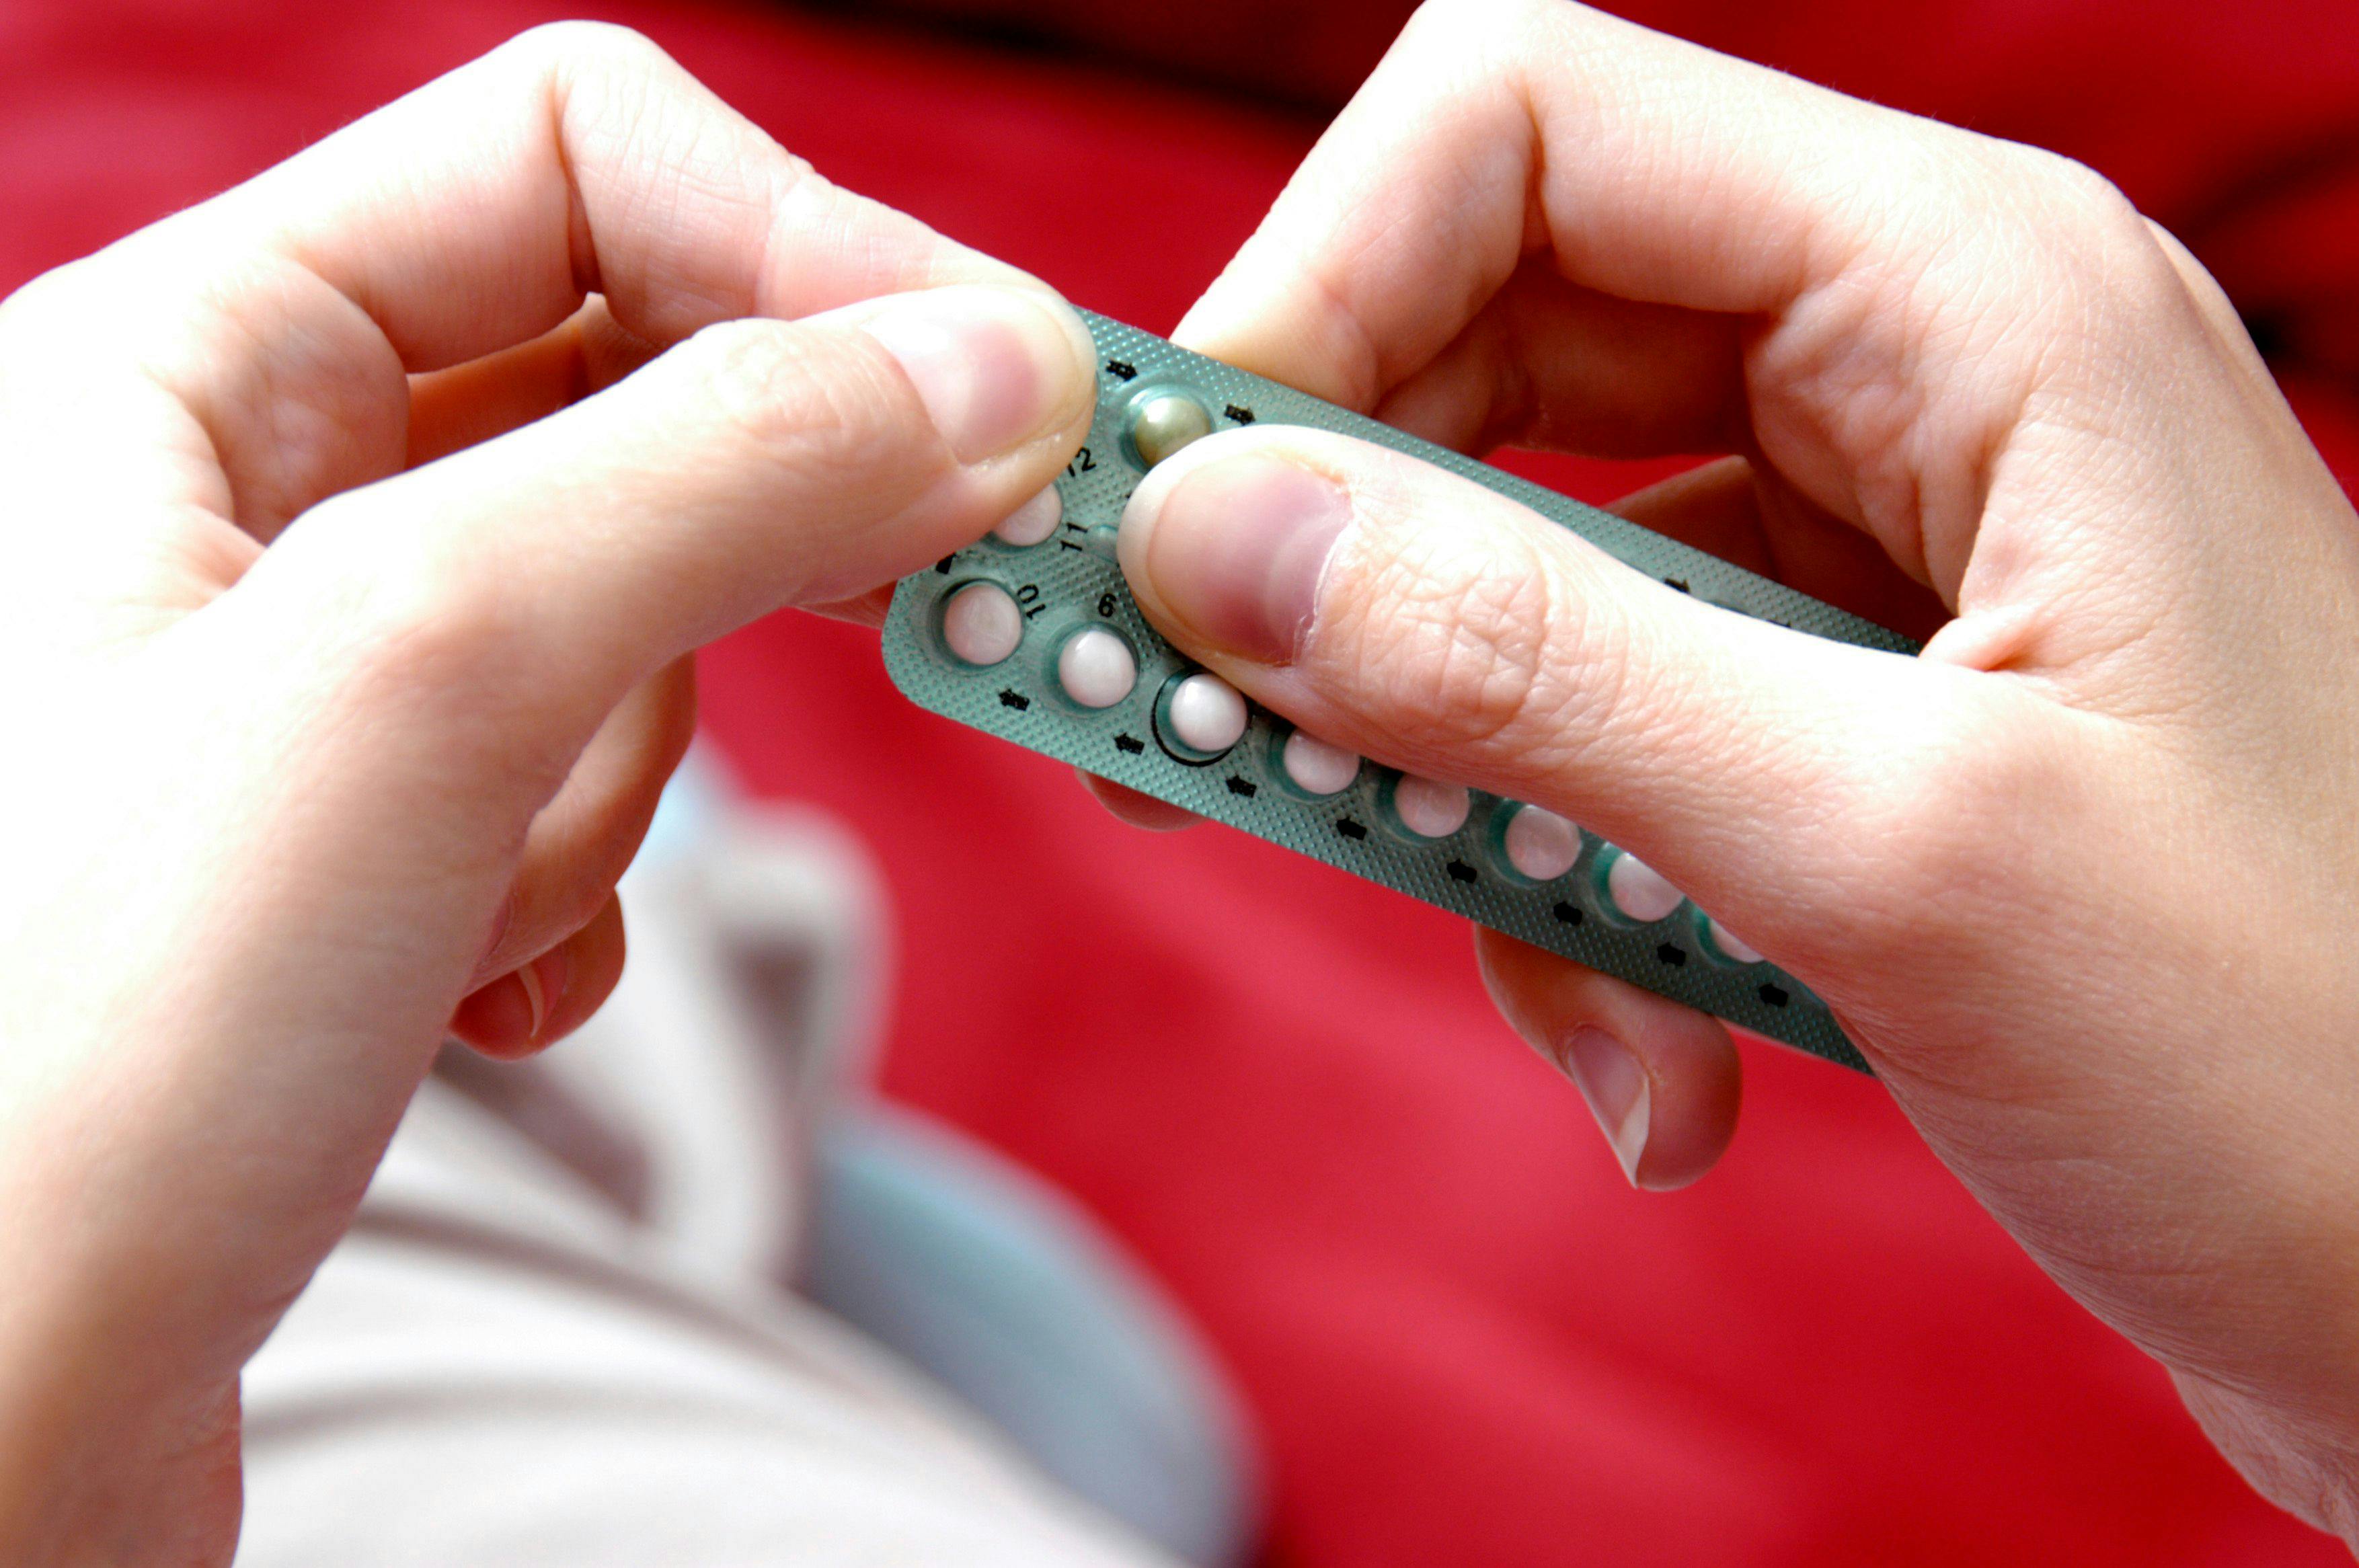 How genetic variables impact oral contraceptive use and VTE risk | Image Credit: © dalaprod - © dalaprod - stock.adobe.com.